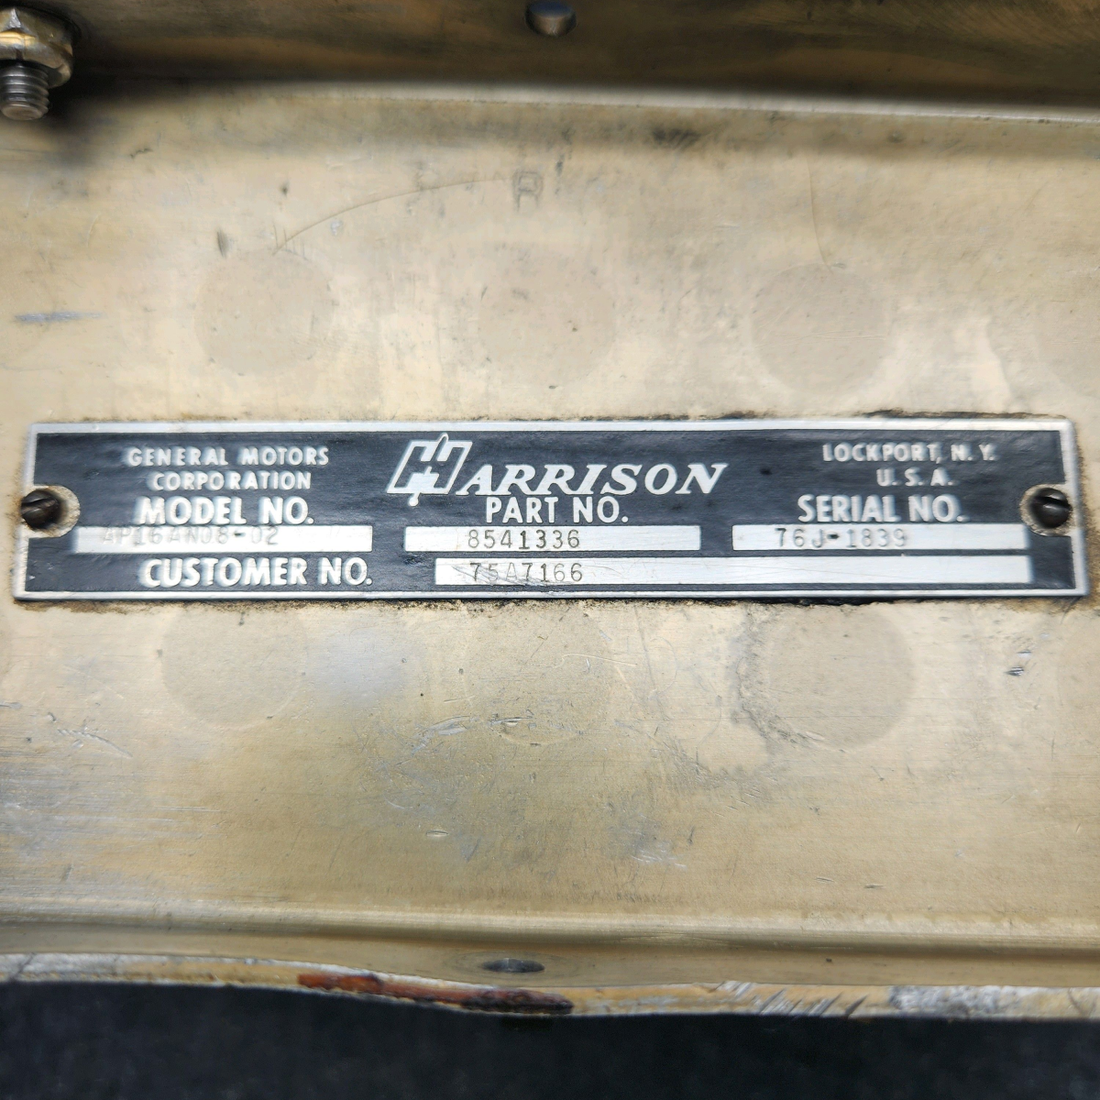 Used aircraft parts for sale, 8541336 Lycoming Textron OIL COOLER ASSEMBLY "SEE PHOTOS"